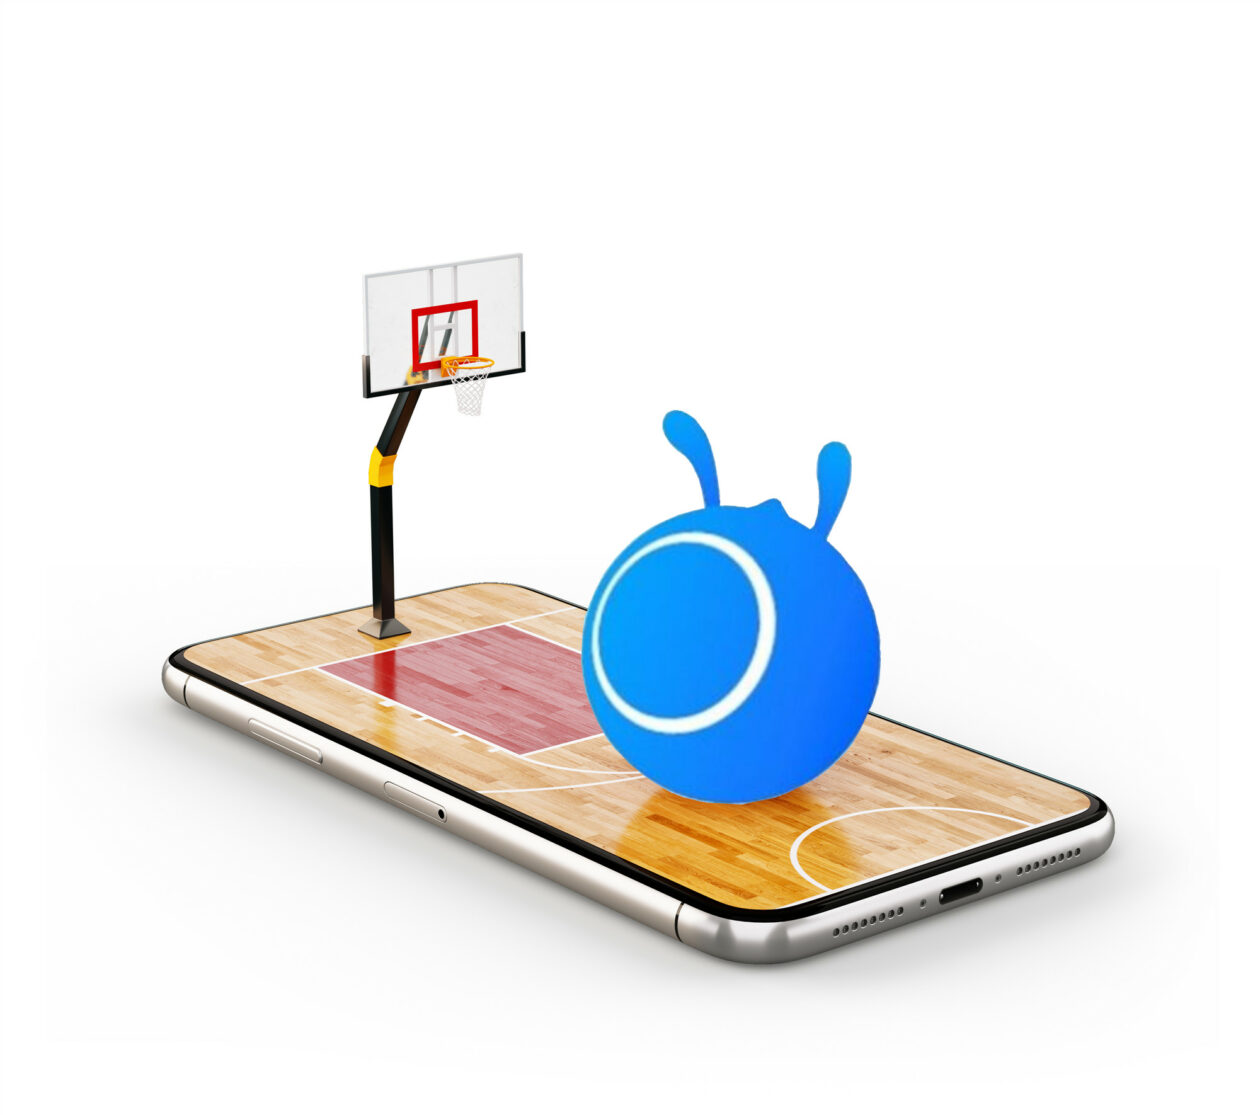 Ant Group logo on a mini basket ball field | NBA to partner Chinese fintech giant Ant Group to launch NFTs in China | sports, Ant Group, Alipay, NFT - Non-Fungible Token, China